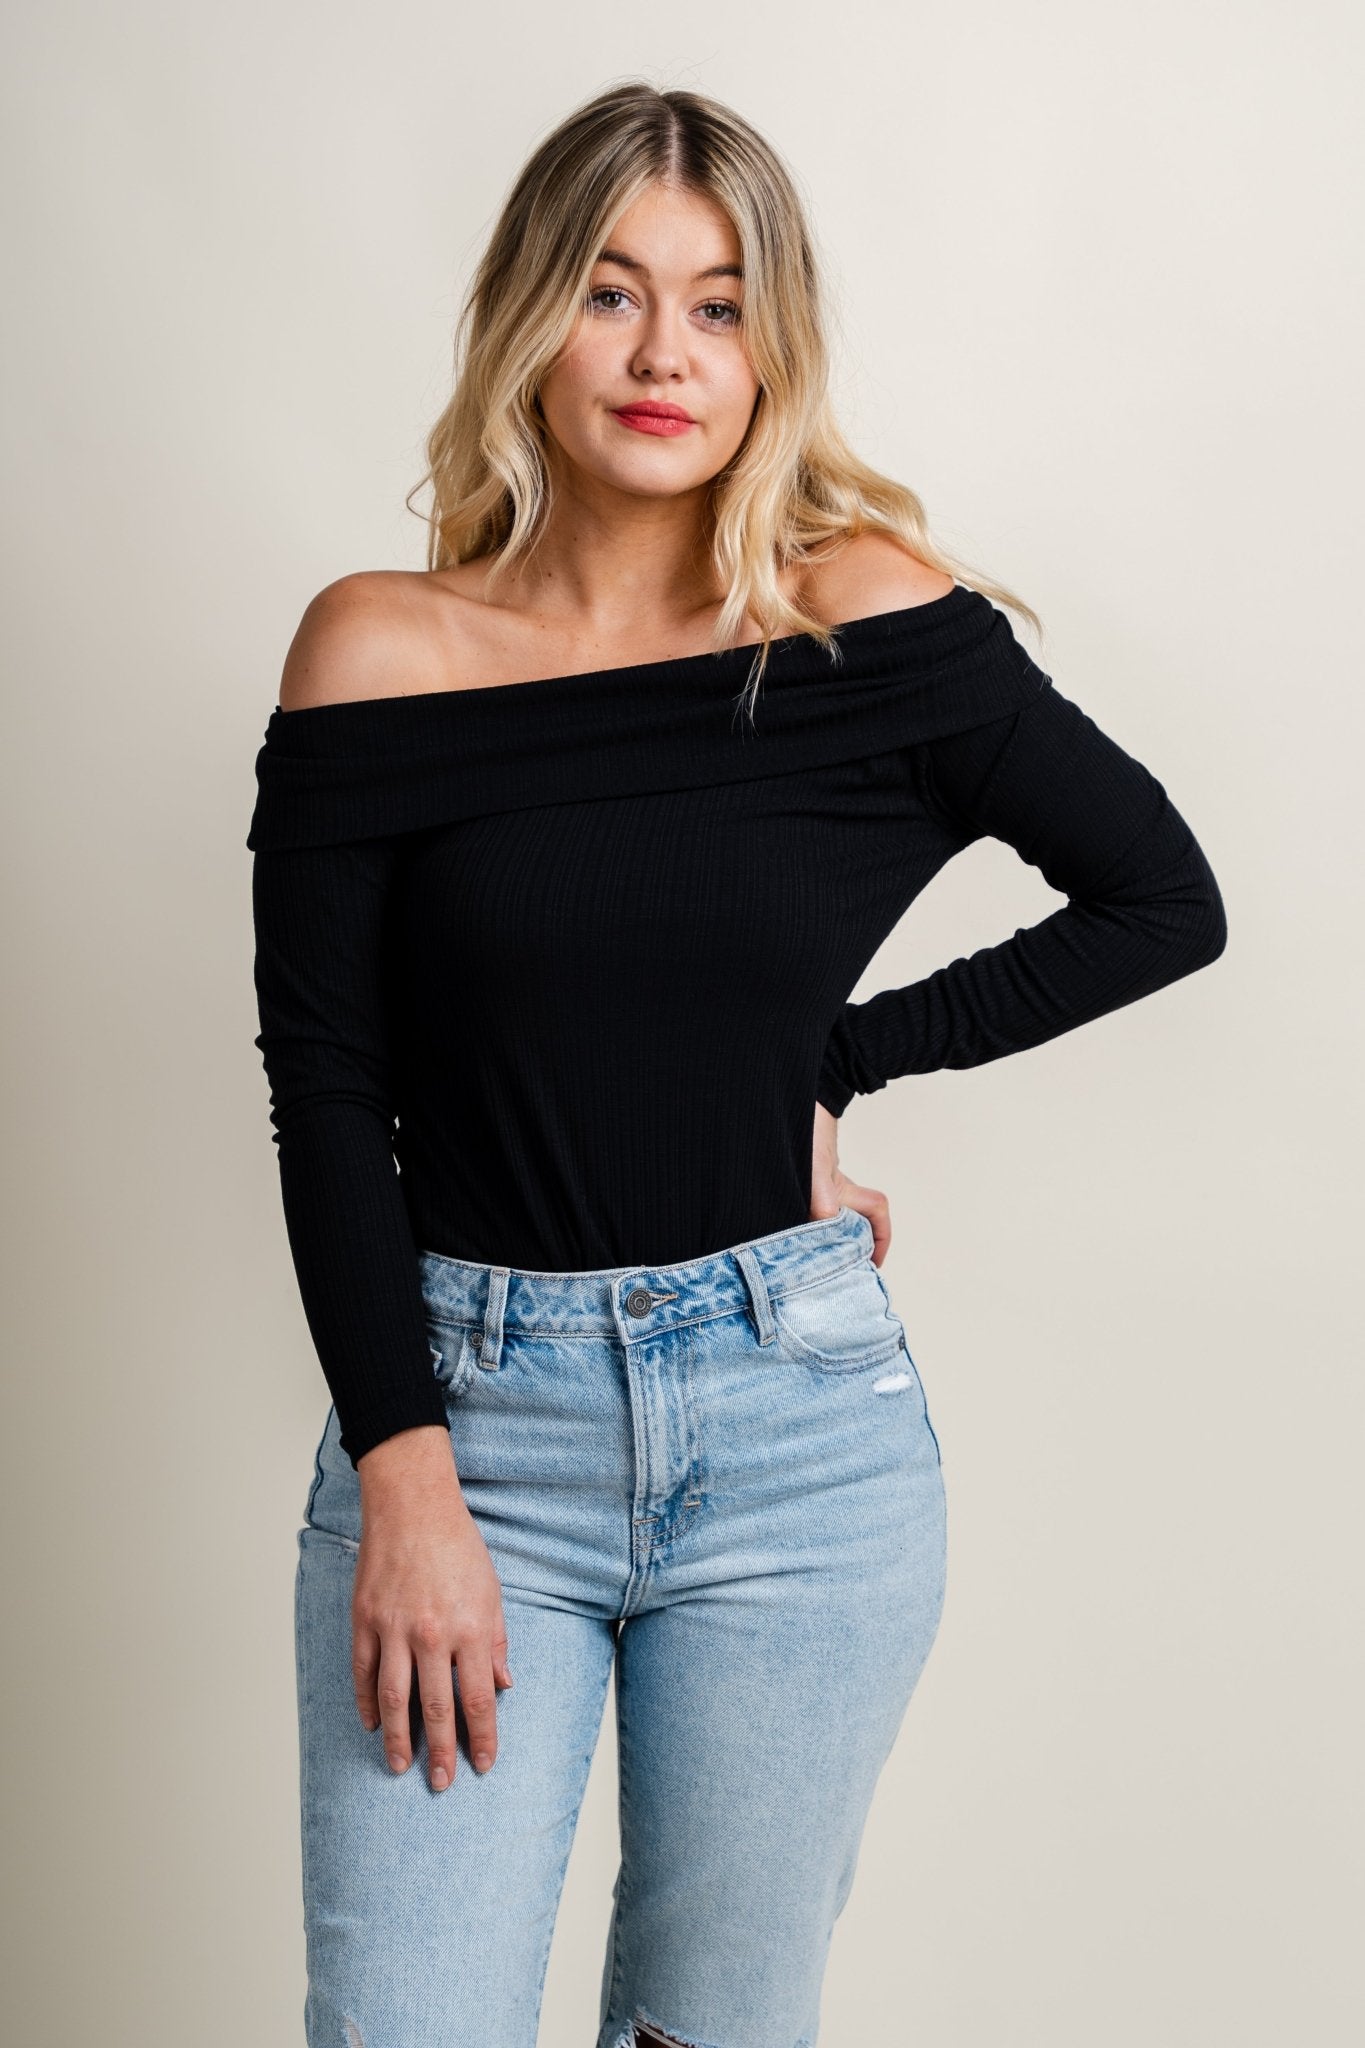 Z Supply Elena off shoulder top black - Z Supply Top - Z Supply Apparel at Lush Fashion Lounge Trendy Boutique Oklahoma City